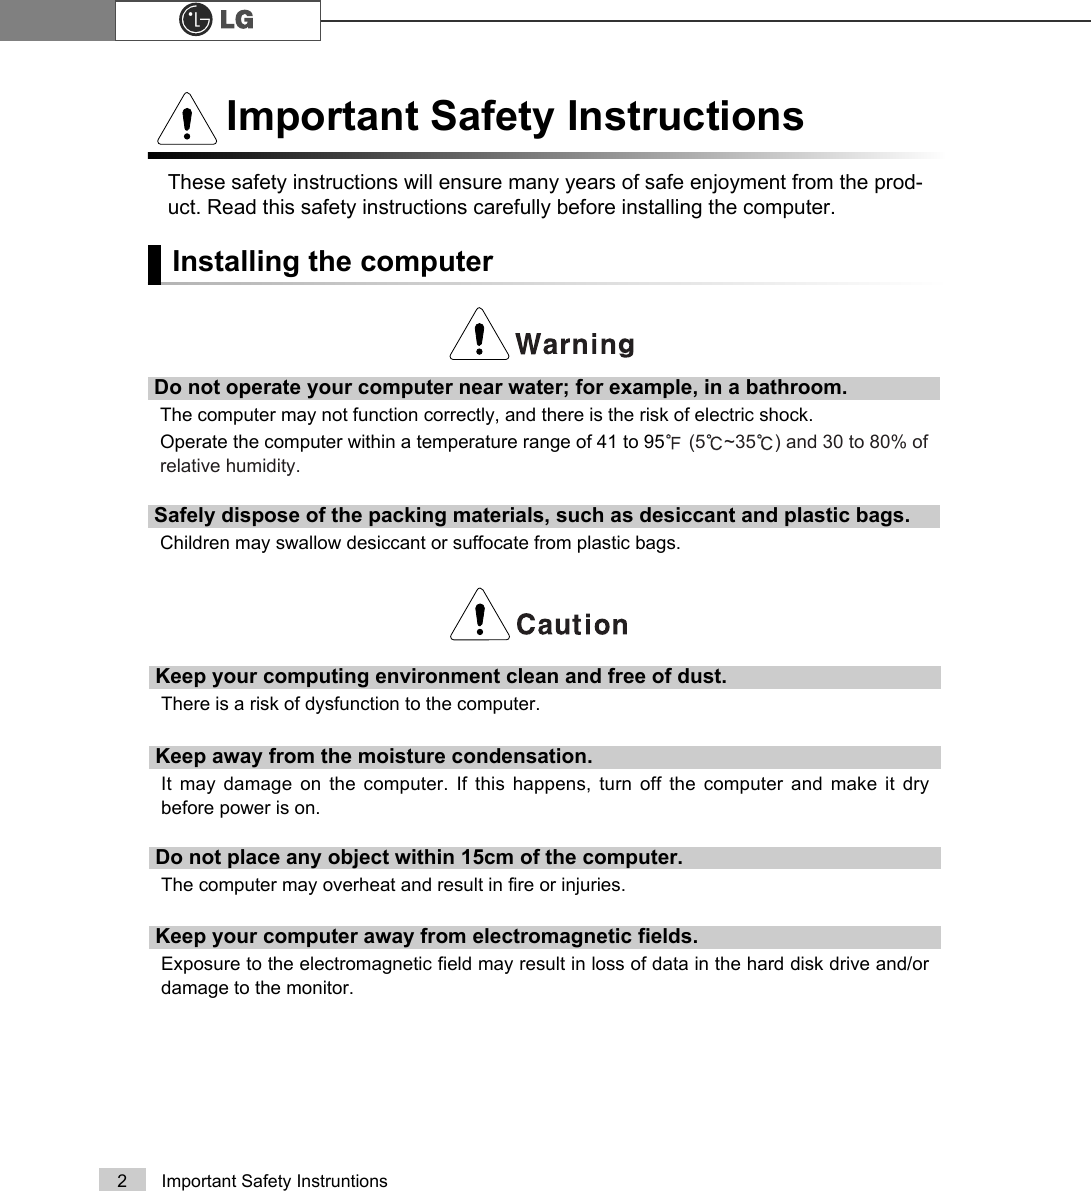 2 Important Safety InstruntionsThese safety instructions will ensure many years of safe enjoyment from the prod-uct. Read this safety instructions carefully before installing the computer.Installing the computerImportant Safety InstructionsDo not operate your computer near water; for example, in a bathroom. The computer may not function correctly, and there is the risk of electric shock.Operate the computer within a temperature range of 41 to 95ĕ(5Ë~35Ë) and 30 to 80% ofrelative humidity.Safely dispose of the packing materials, such as desiccant and plastic bags.Children may swallow desiccant or suffocate from plastic bags.Keep your computing environment clean and free of dust.There is a risk of dysfunction to the computer.Keep away from the moisture condensation.It may damage on the computer. If this happens, turn off the computer and make it drybefore power is on.Do not place any object within 15cm of the computer.The computer may overheat and result in fire or injuries.Keep your computer away from electromagnetic fields.Exposure to the electromagnetic field may result in loss of data in the hard disk drive and/ordamage to the monitor.